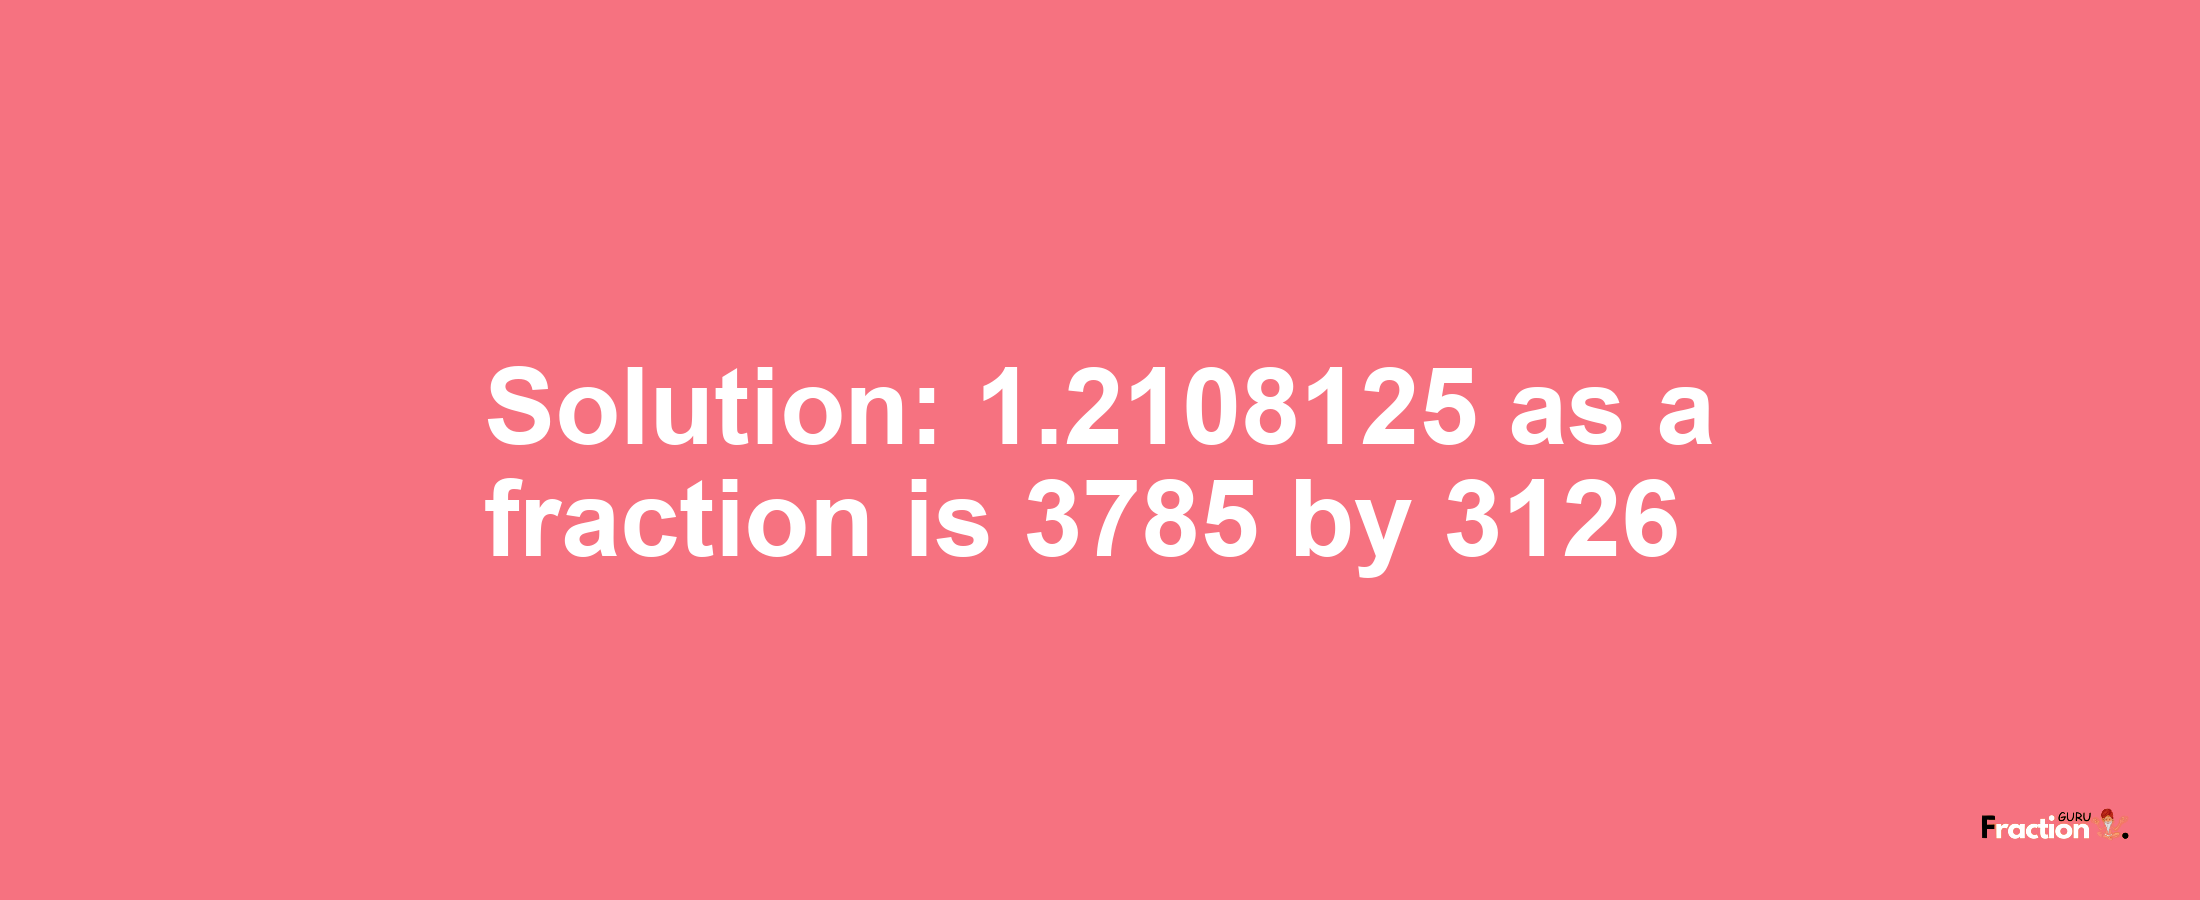 Solution:1.2108125 as a fraction is 3785/3126